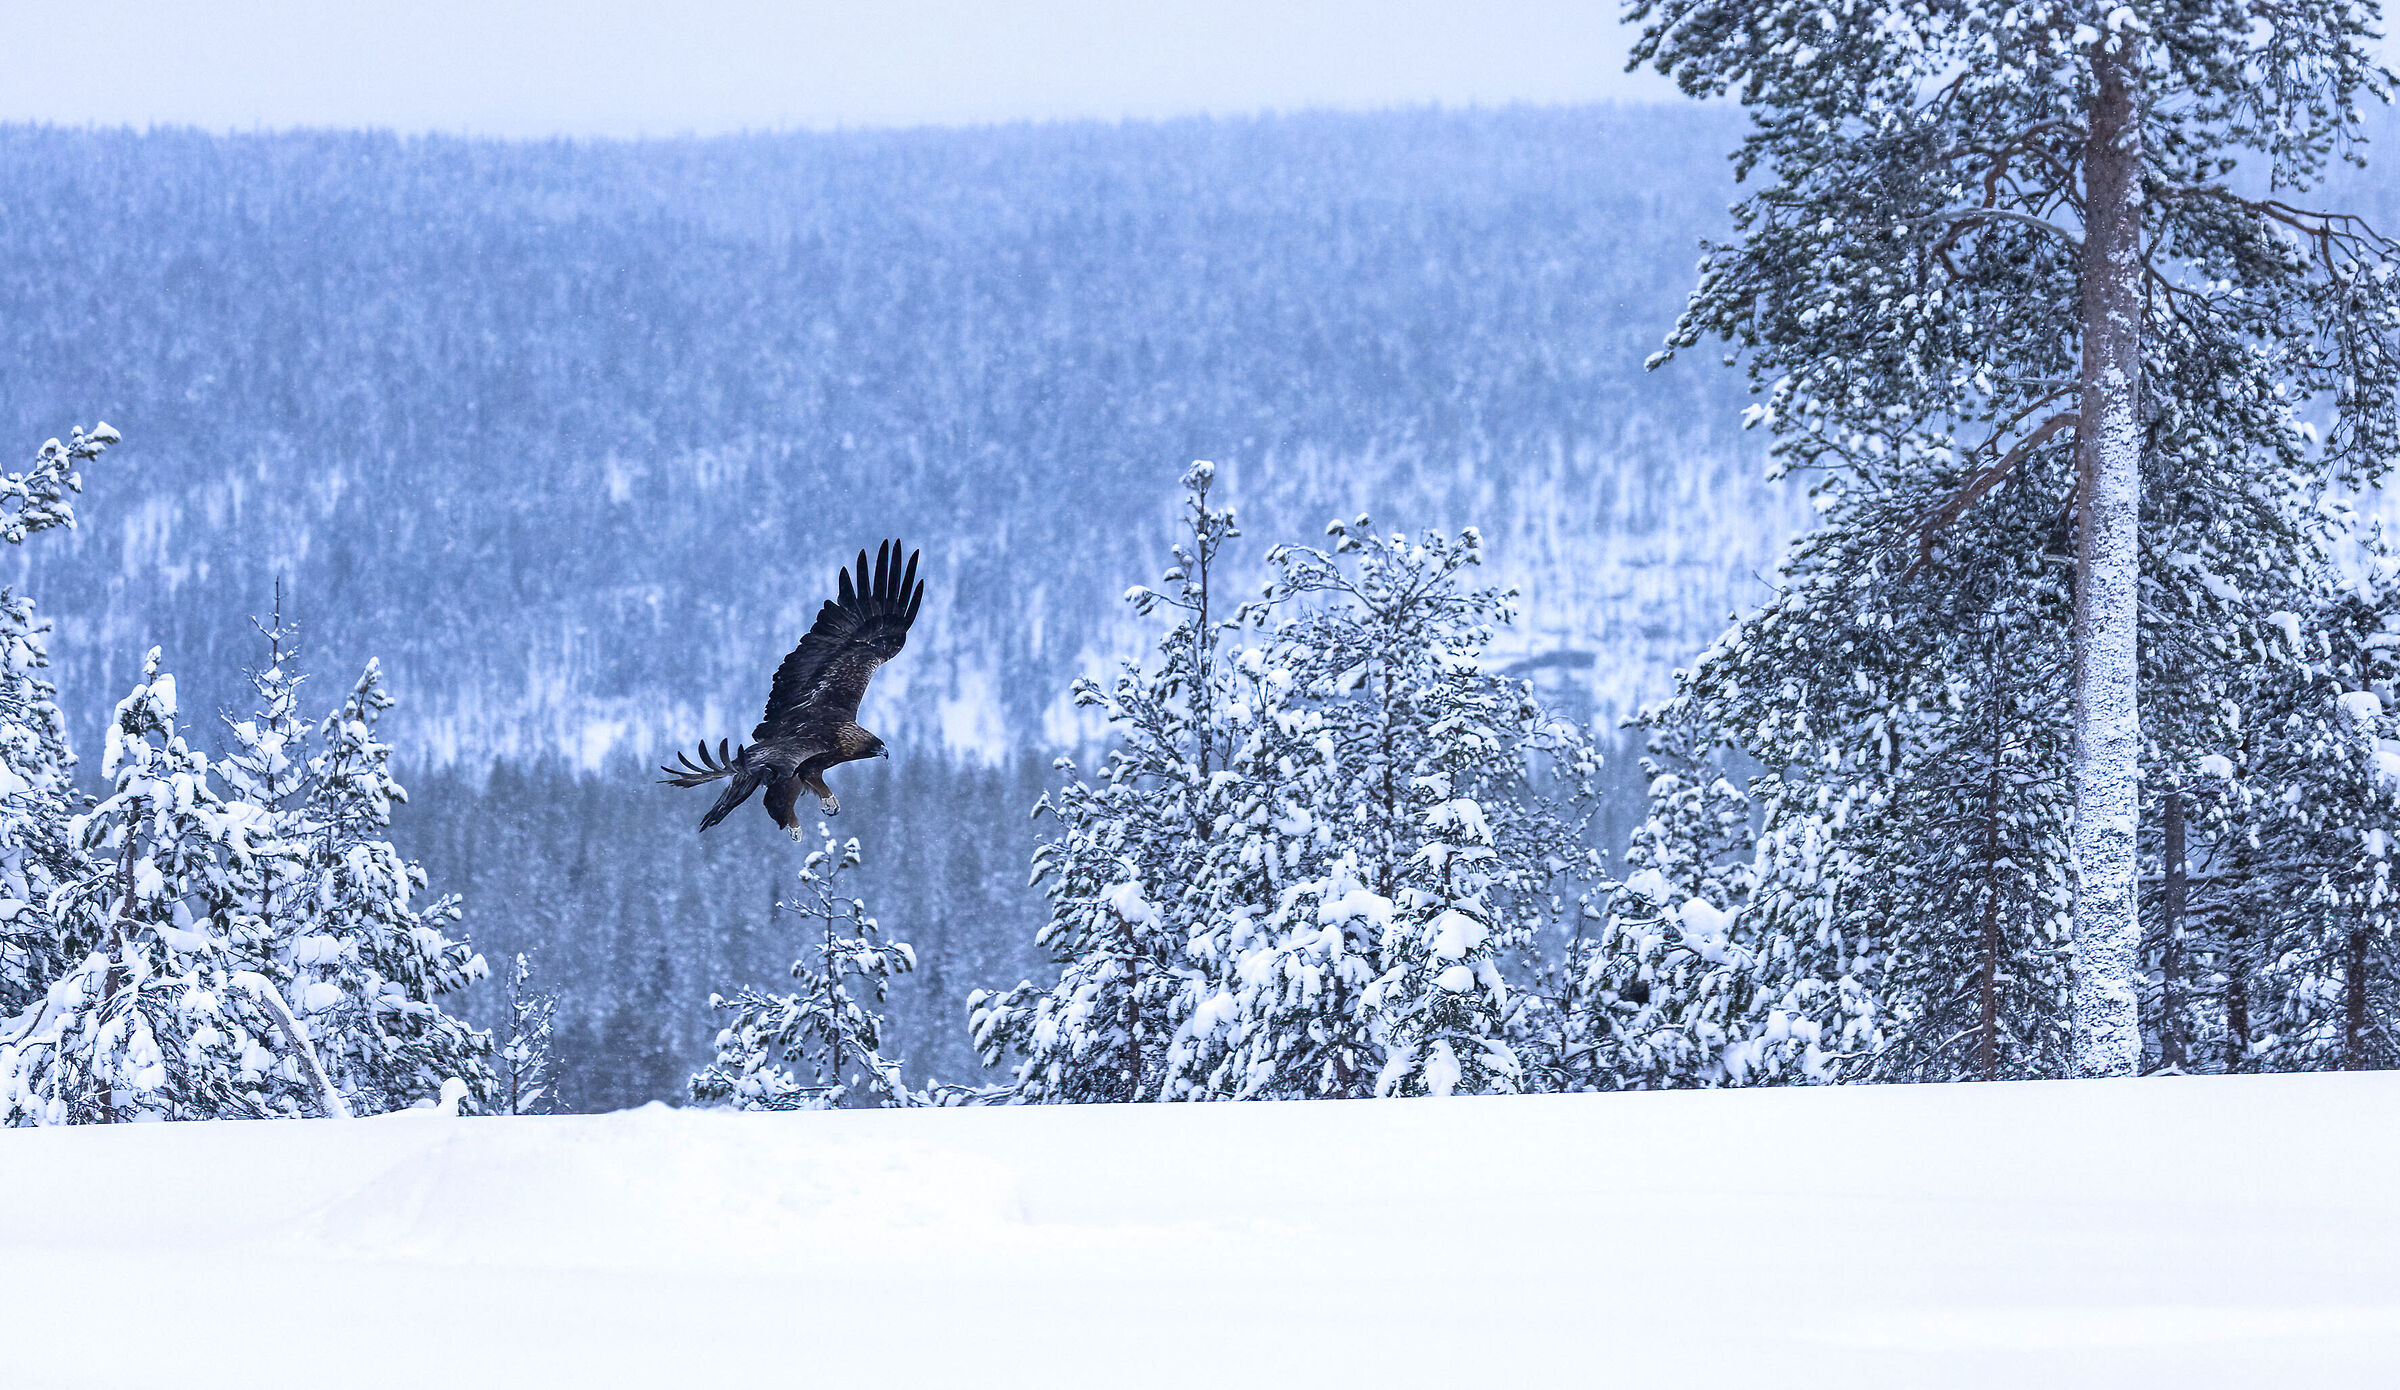 The golden eagle and the snowy landscape...